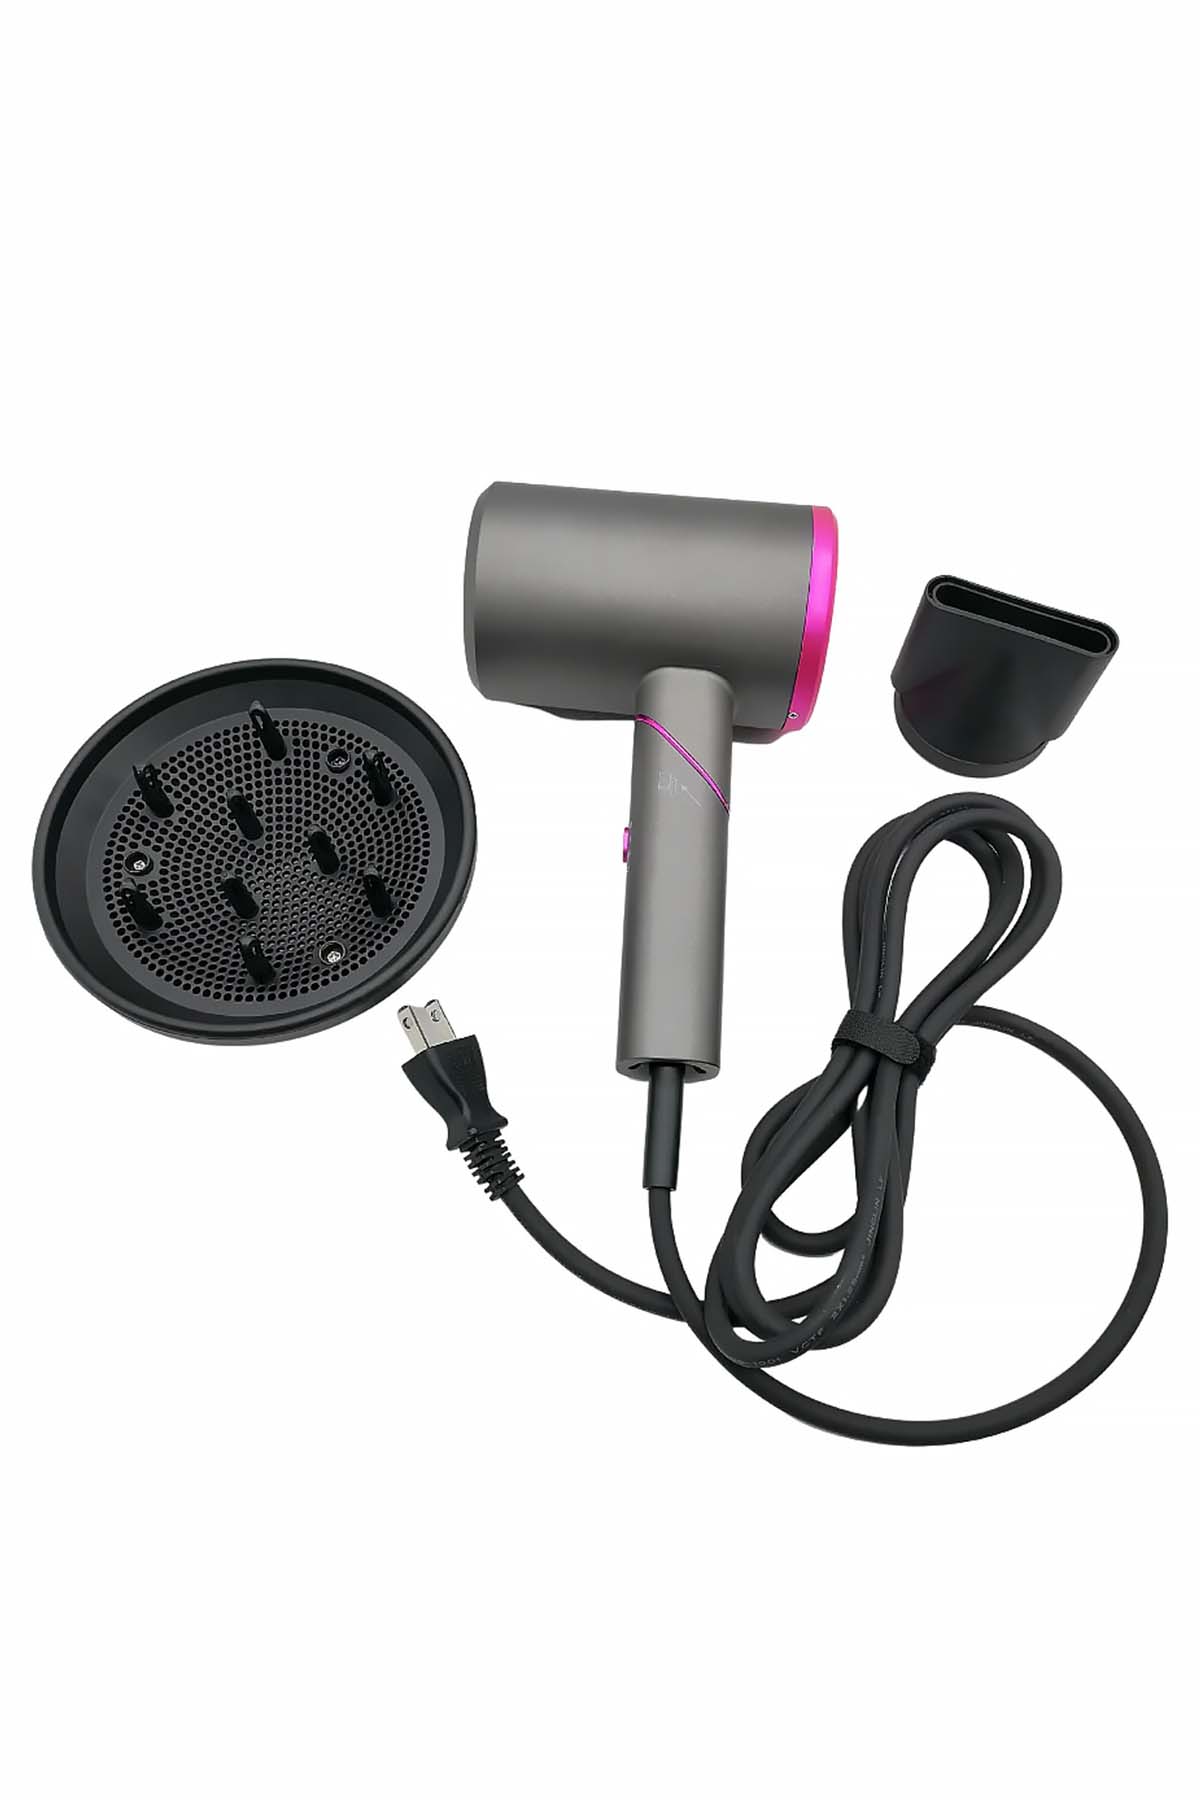 TheSalonGuy Ionic Hair Dryer with Magnetic Attachments